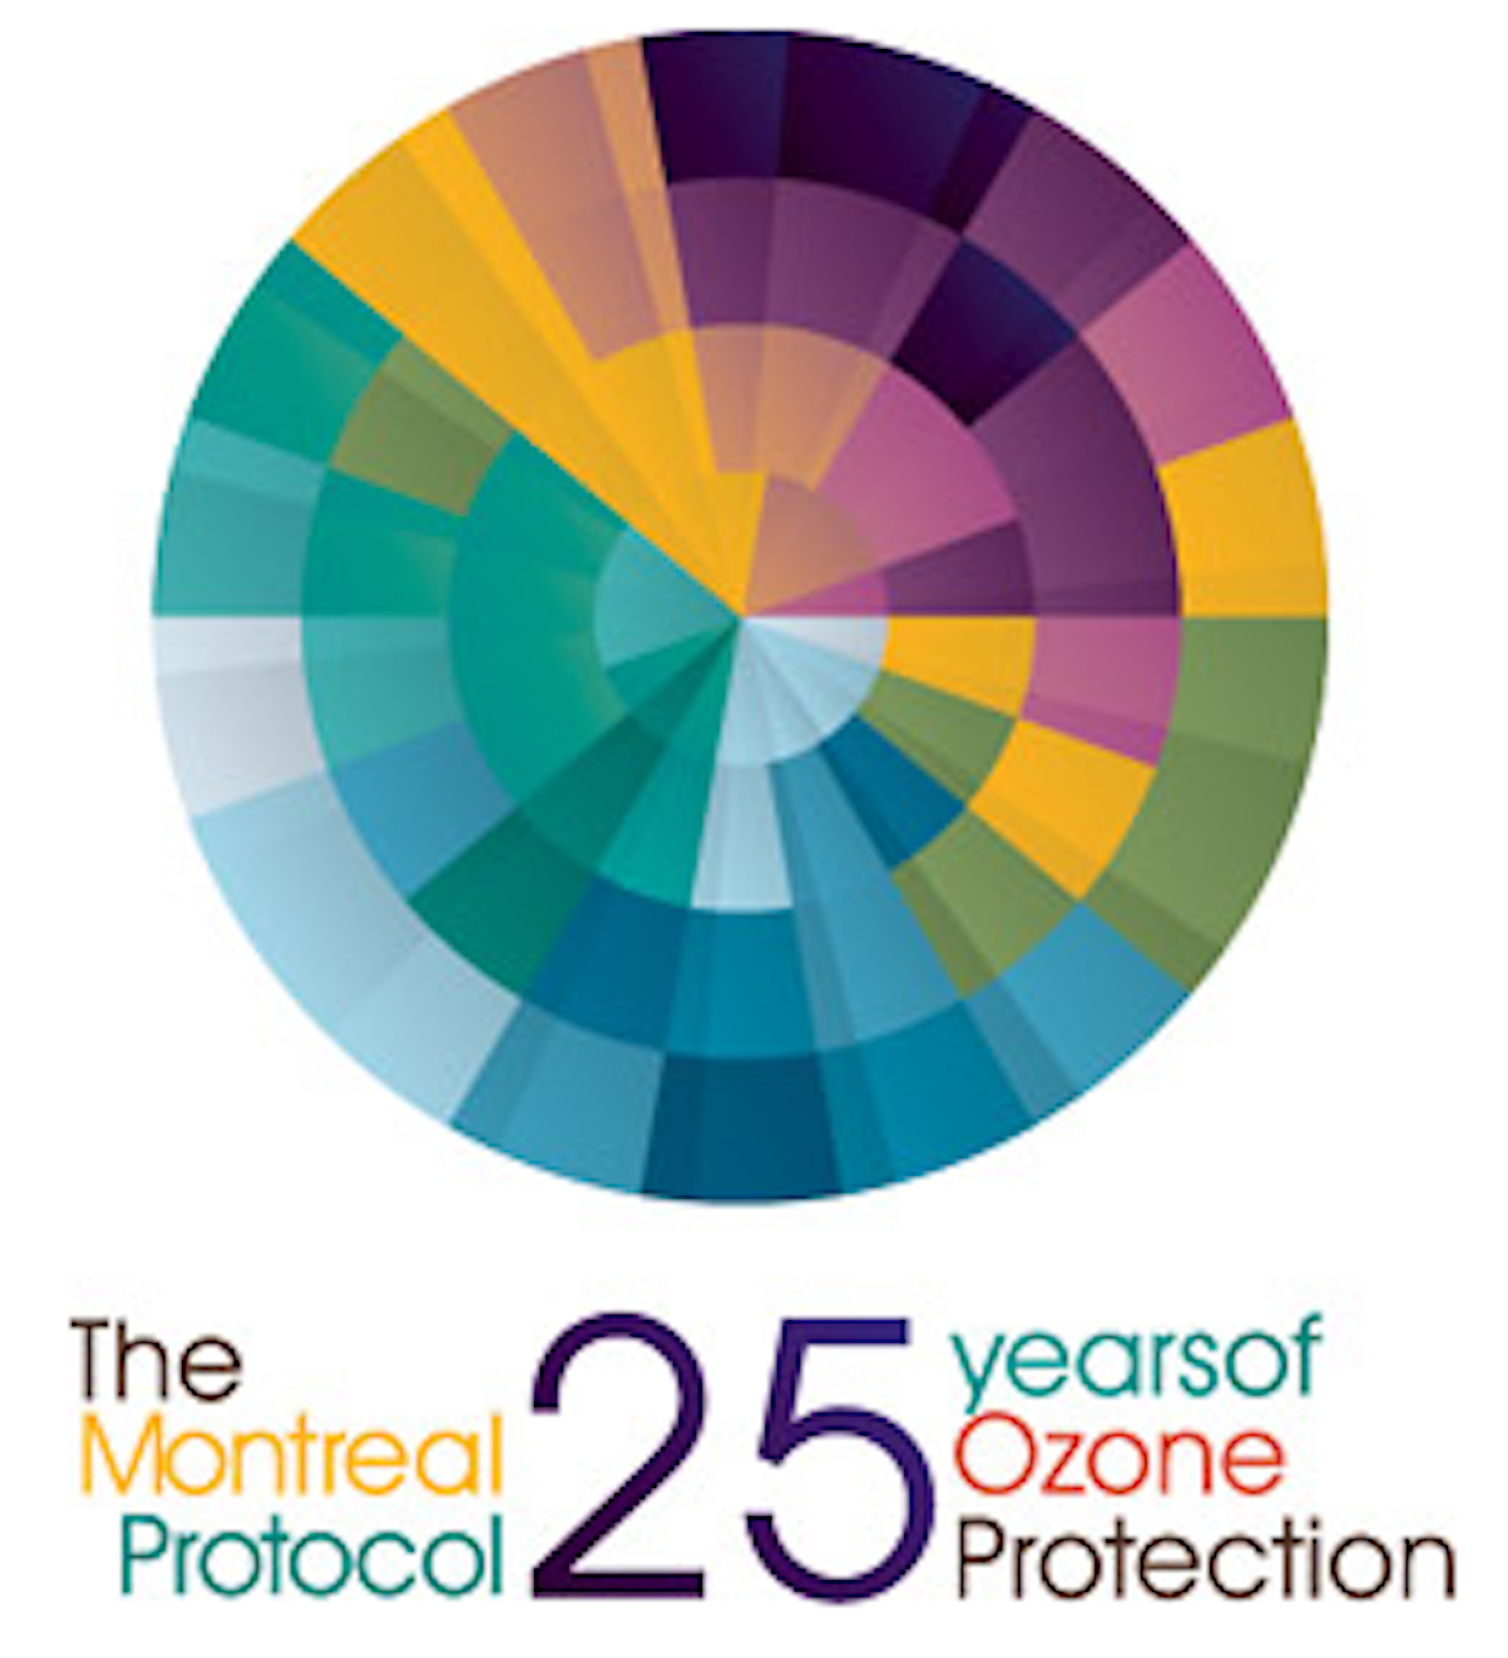 Saving the ozone layer why the Montreal Protocol worked